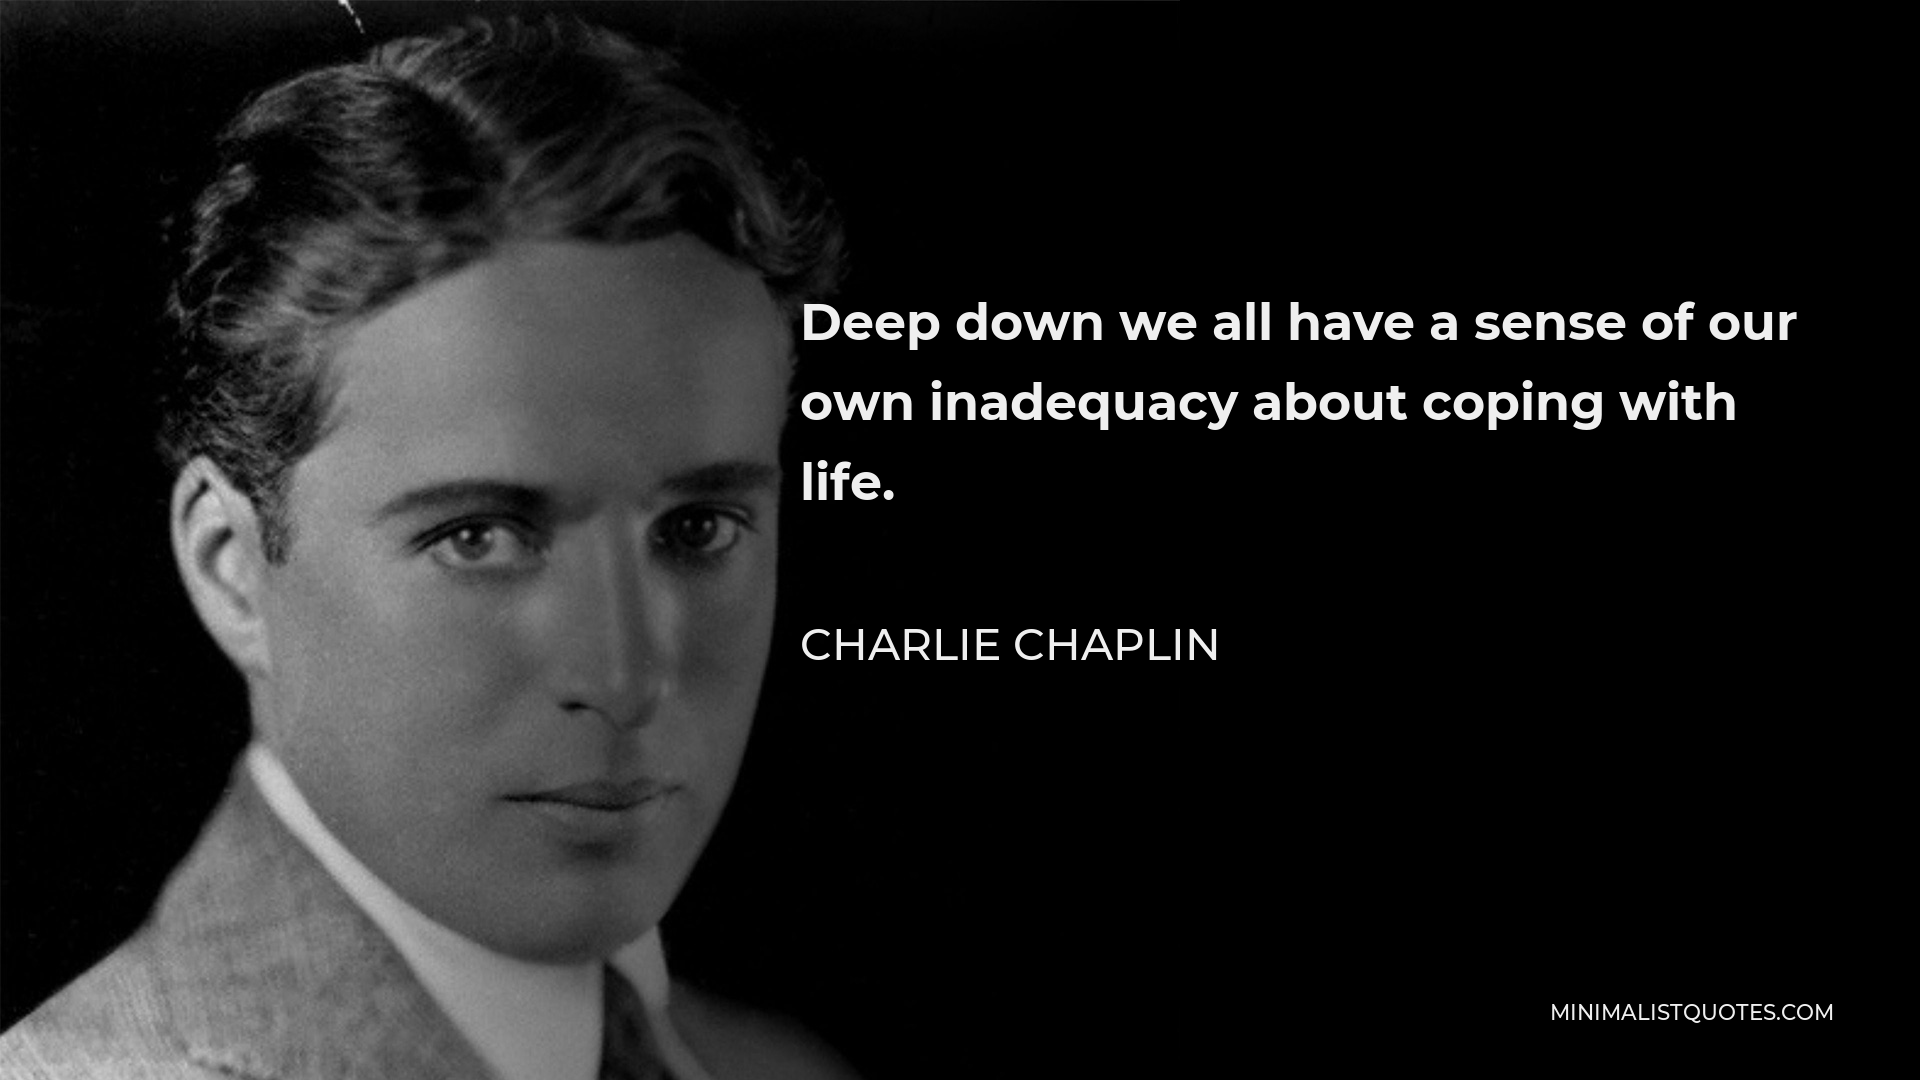 Charlie Chaplin Quote - Deep down we all have a sense of our own inadequacy about coping with life.